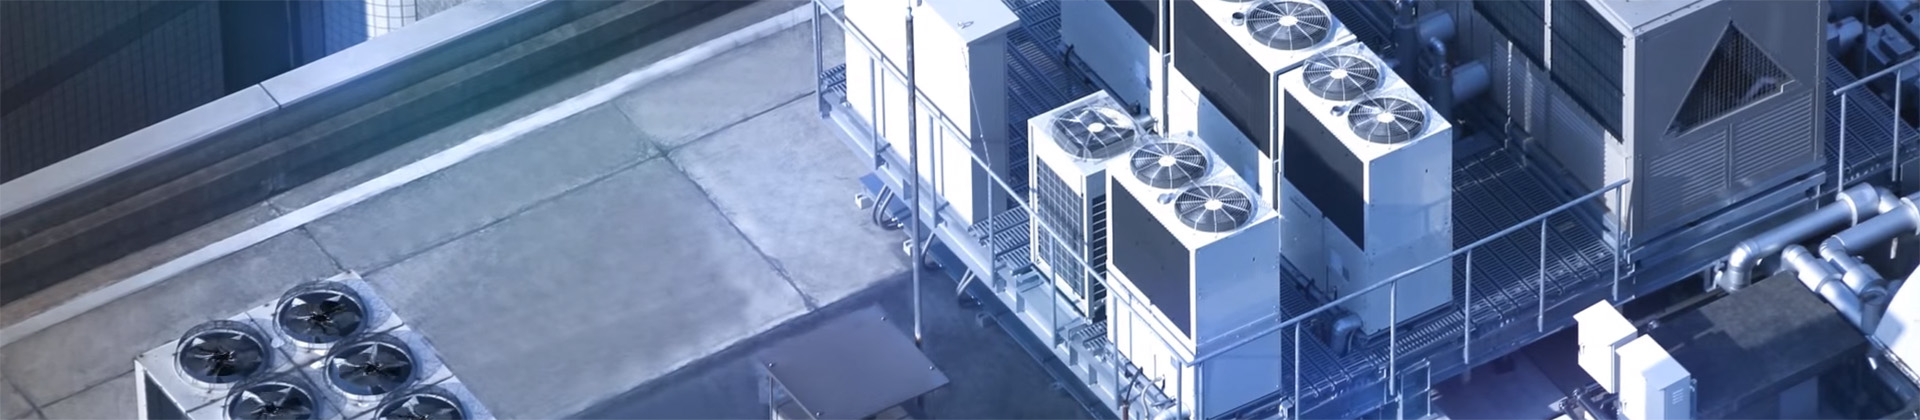 Variable speed video screen grab of rooftop units on a commercial building